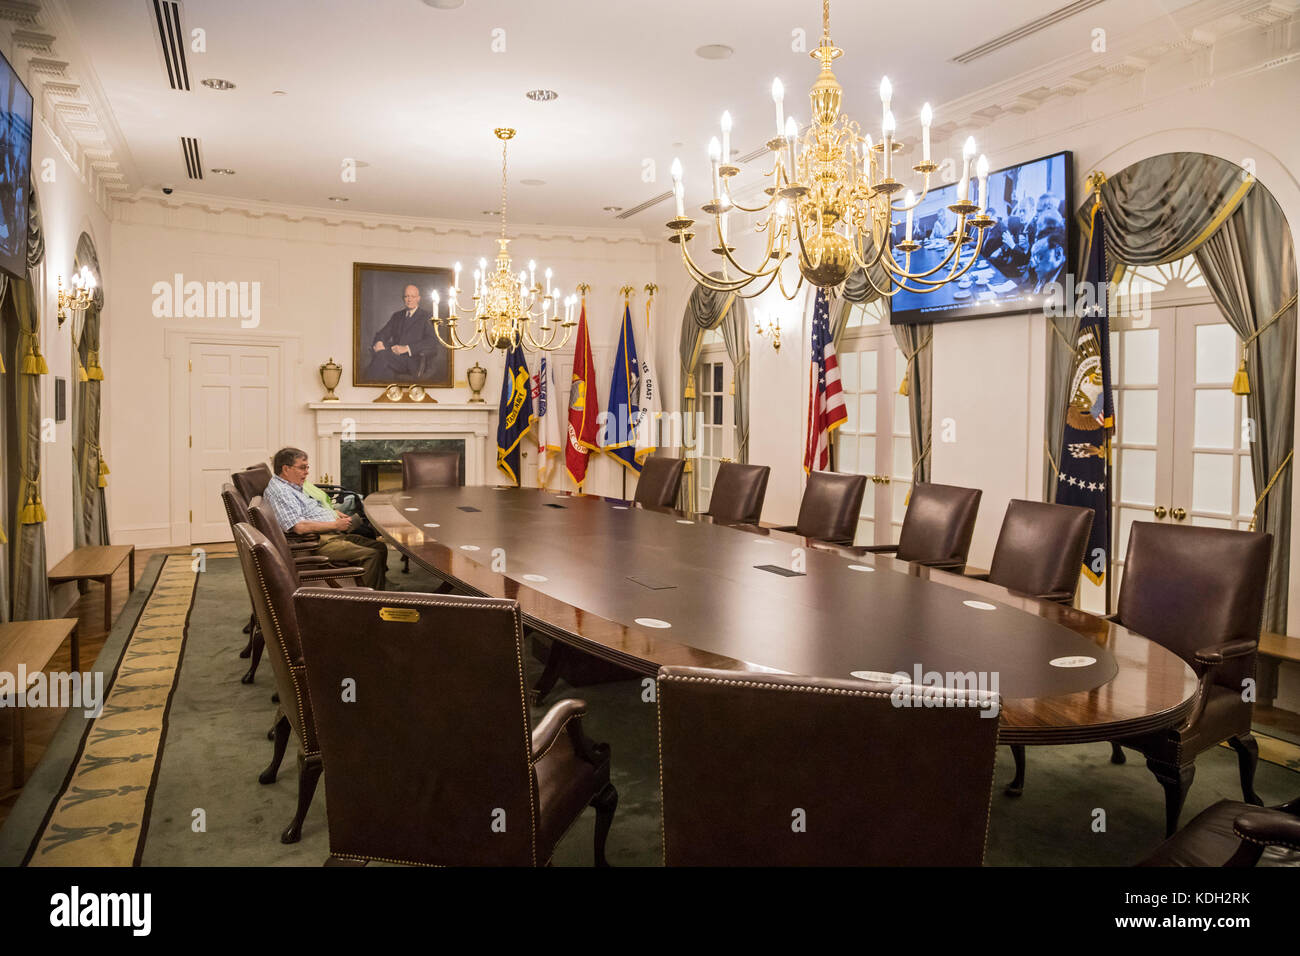 Grand Rapids, Michigan - Visitors sit at the table in the replica of the White House cabinet room at the Gerald Ford Presidential Museum. Stock Photo